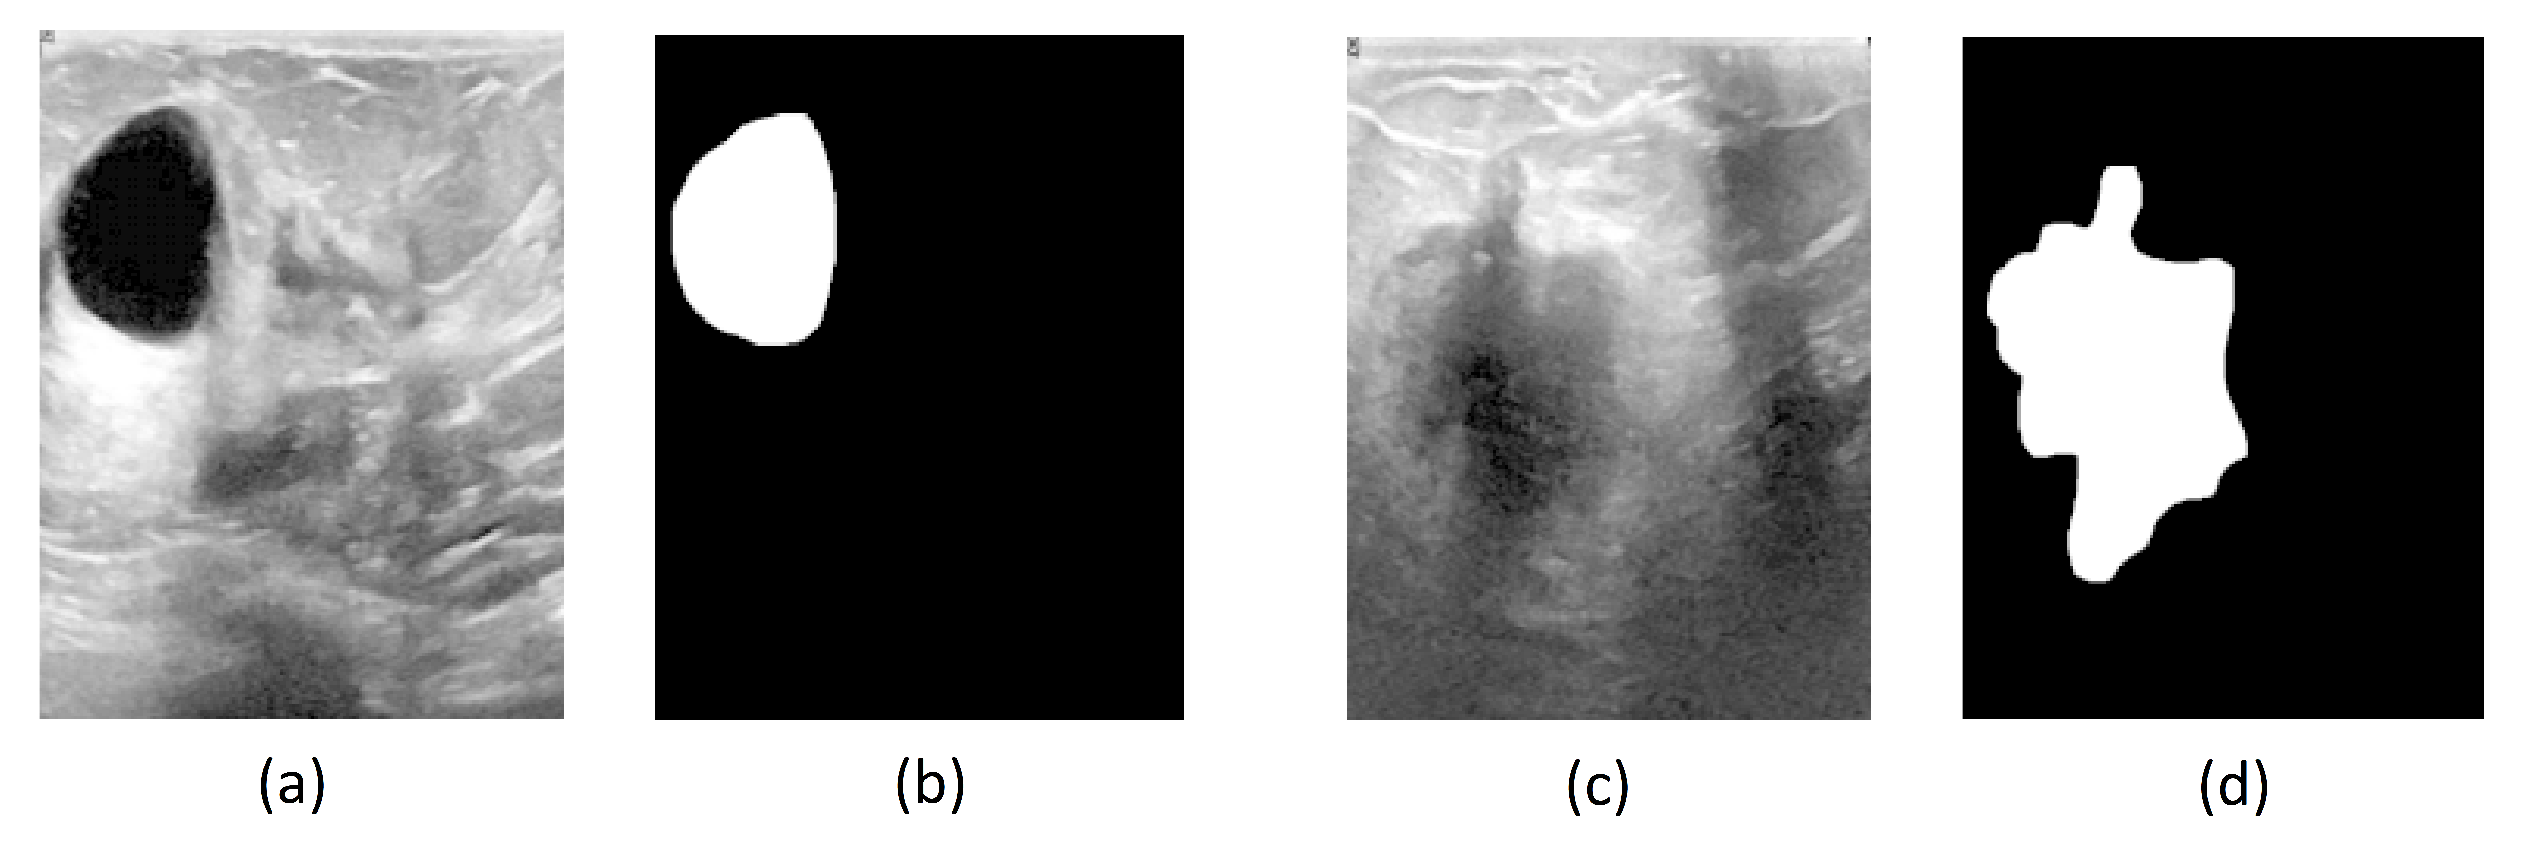 Real-time Burn Classification using Ultrasound Imaging